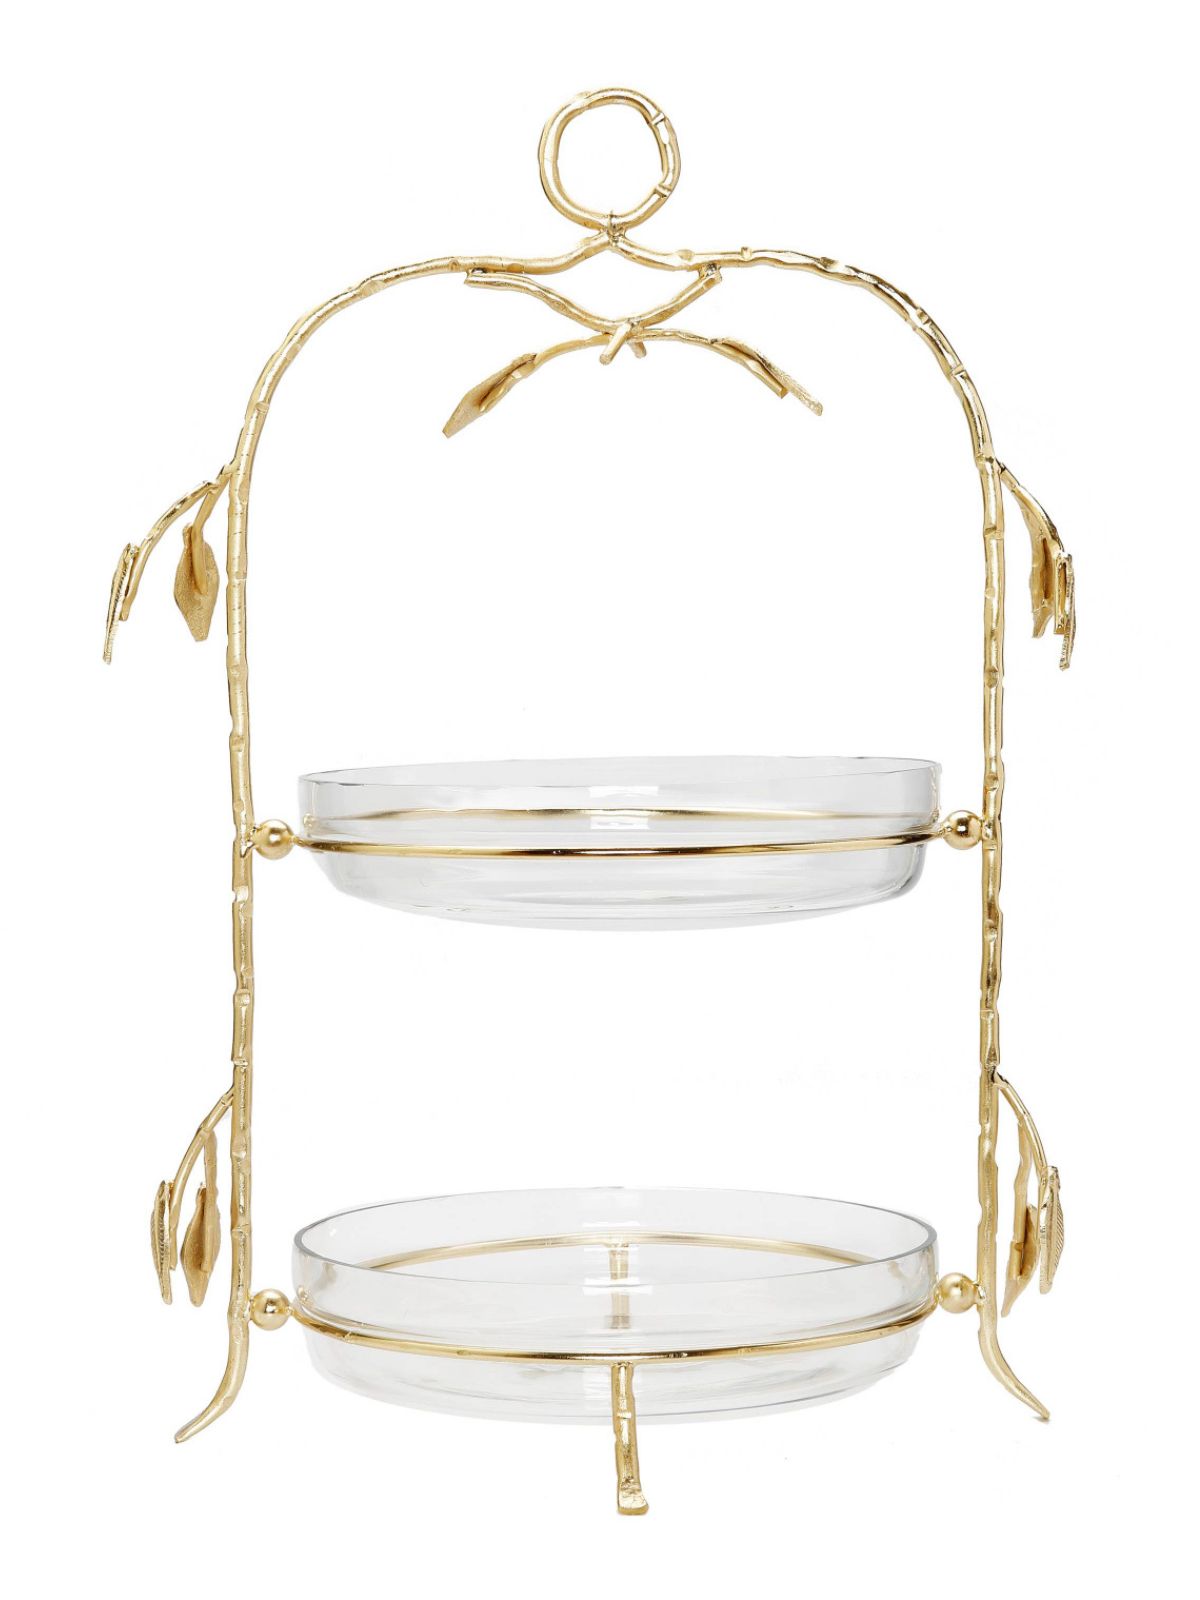 This 2 tier stand features two glass bowls on a gold stainless steel branch and leaf base. 